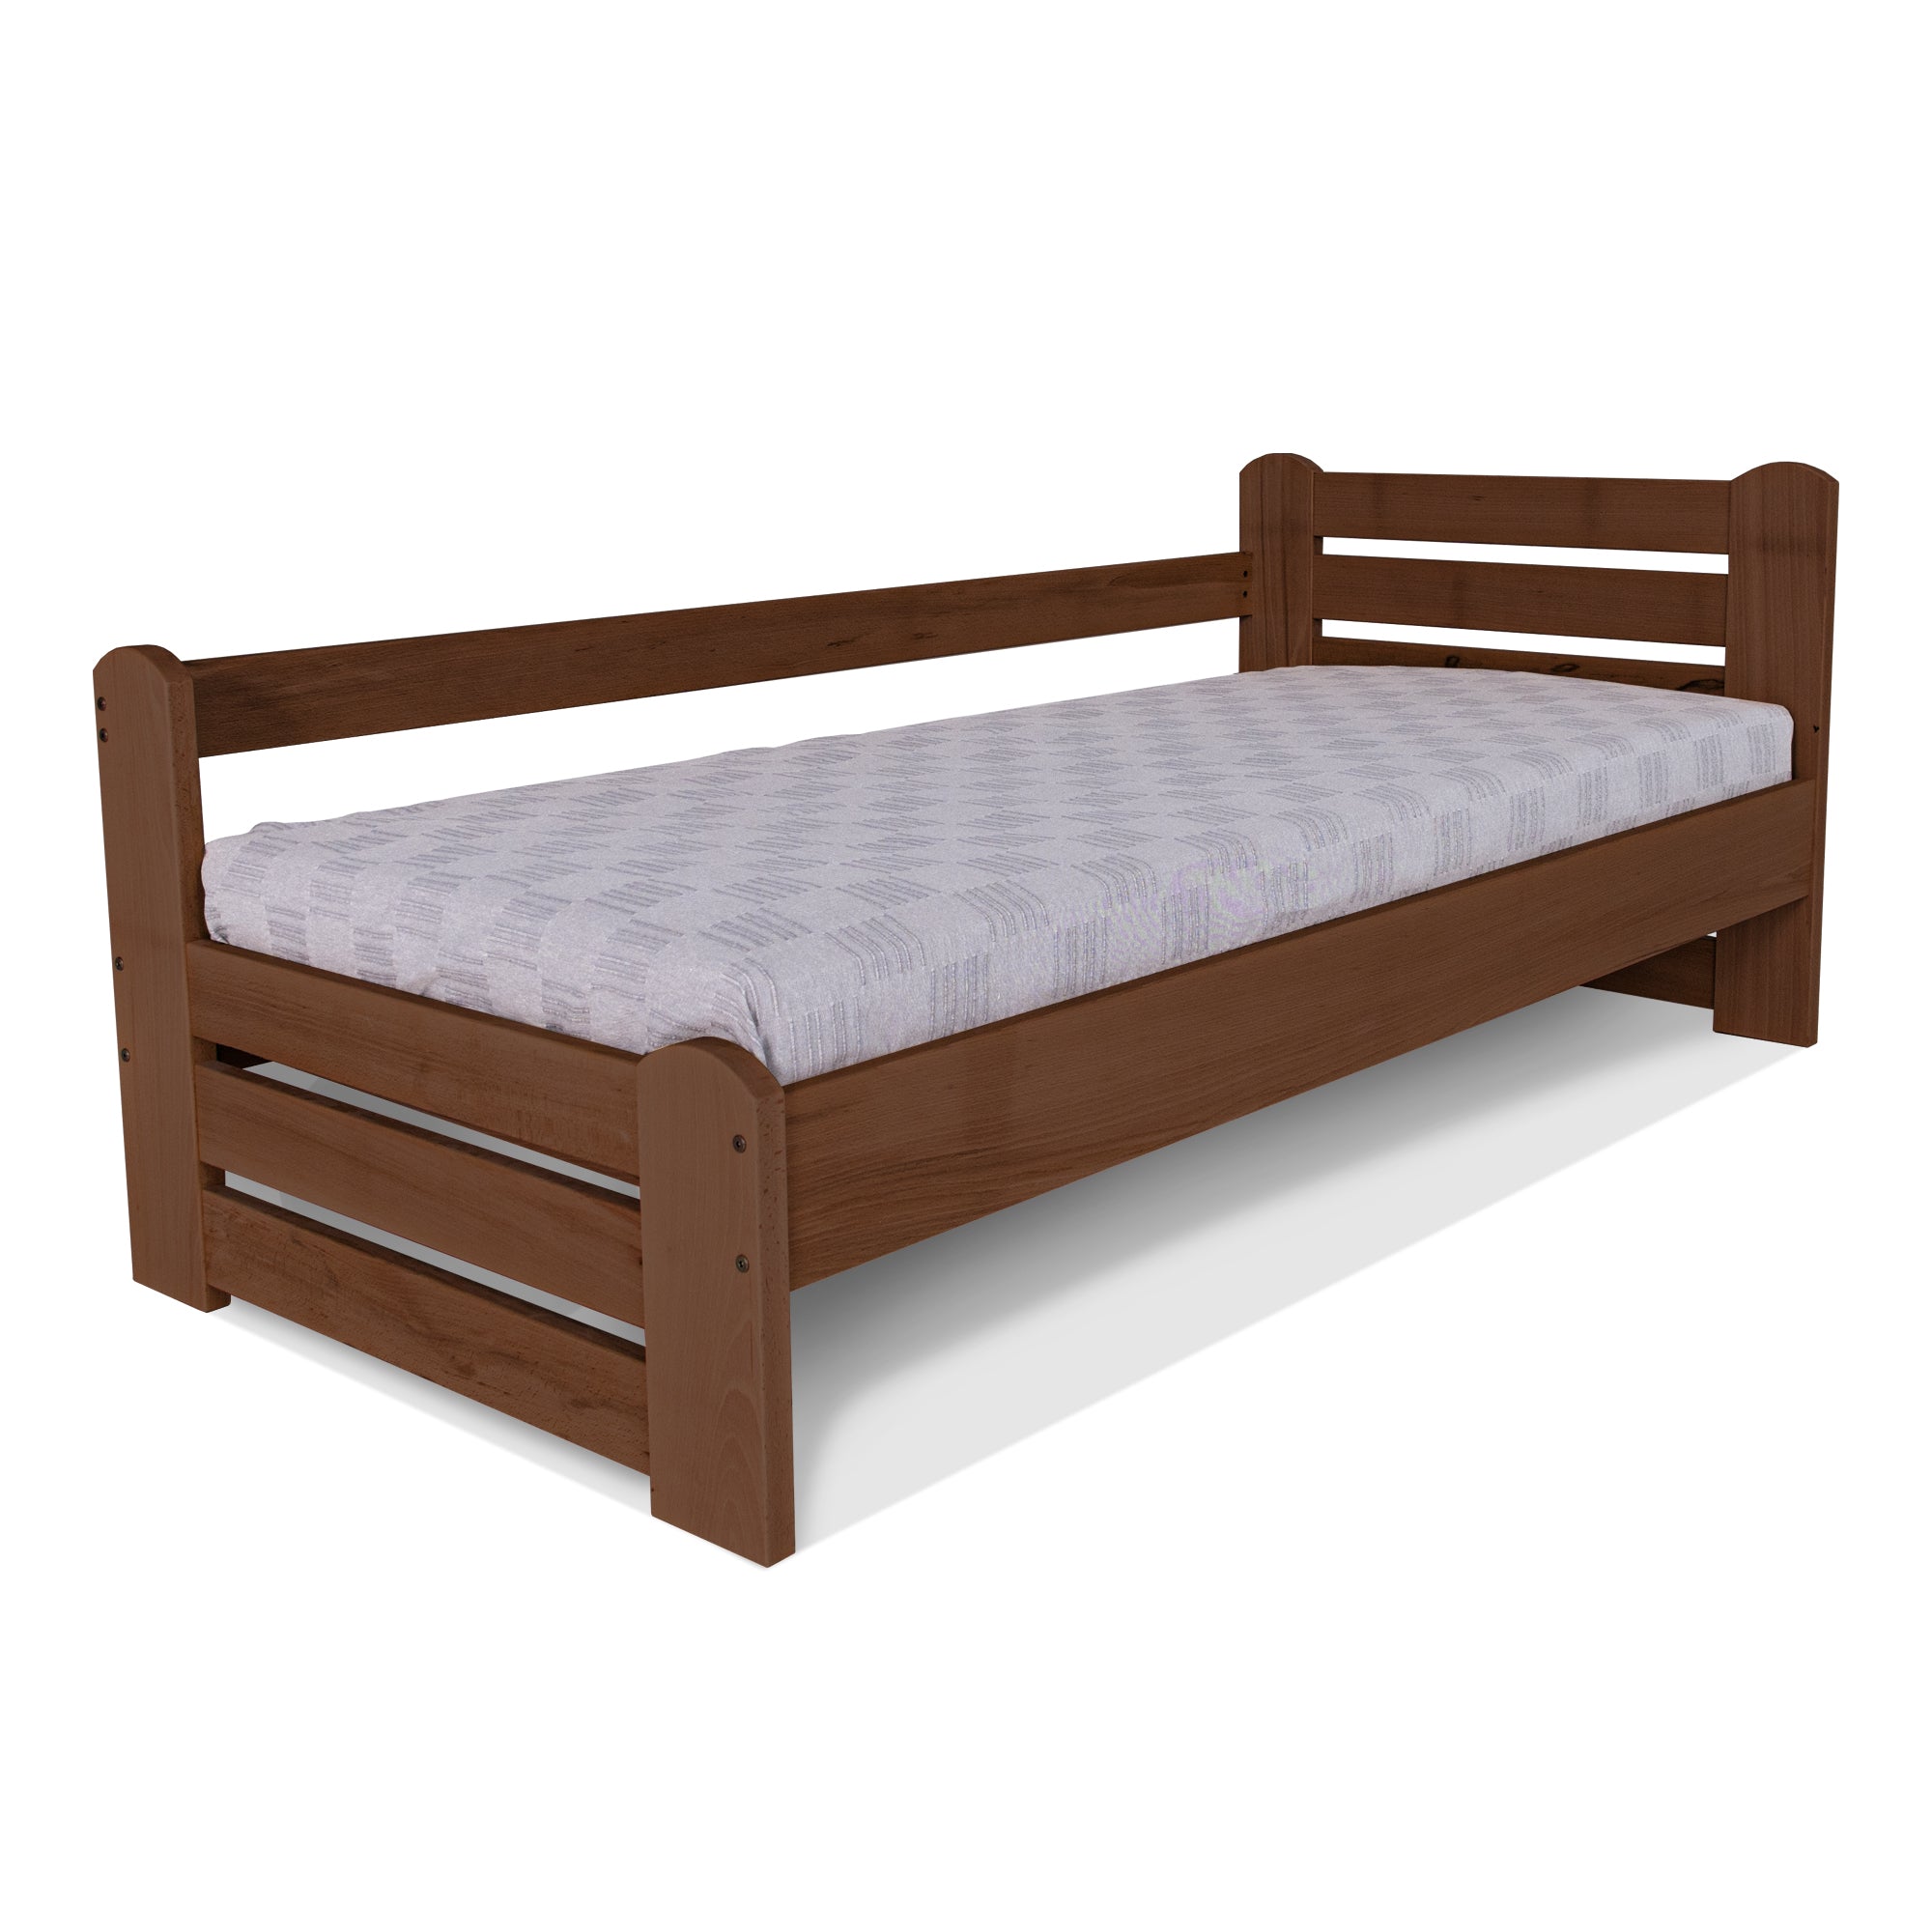 COUNTRY Single Bed with Safety Bar, Beech Wood-walnut frame